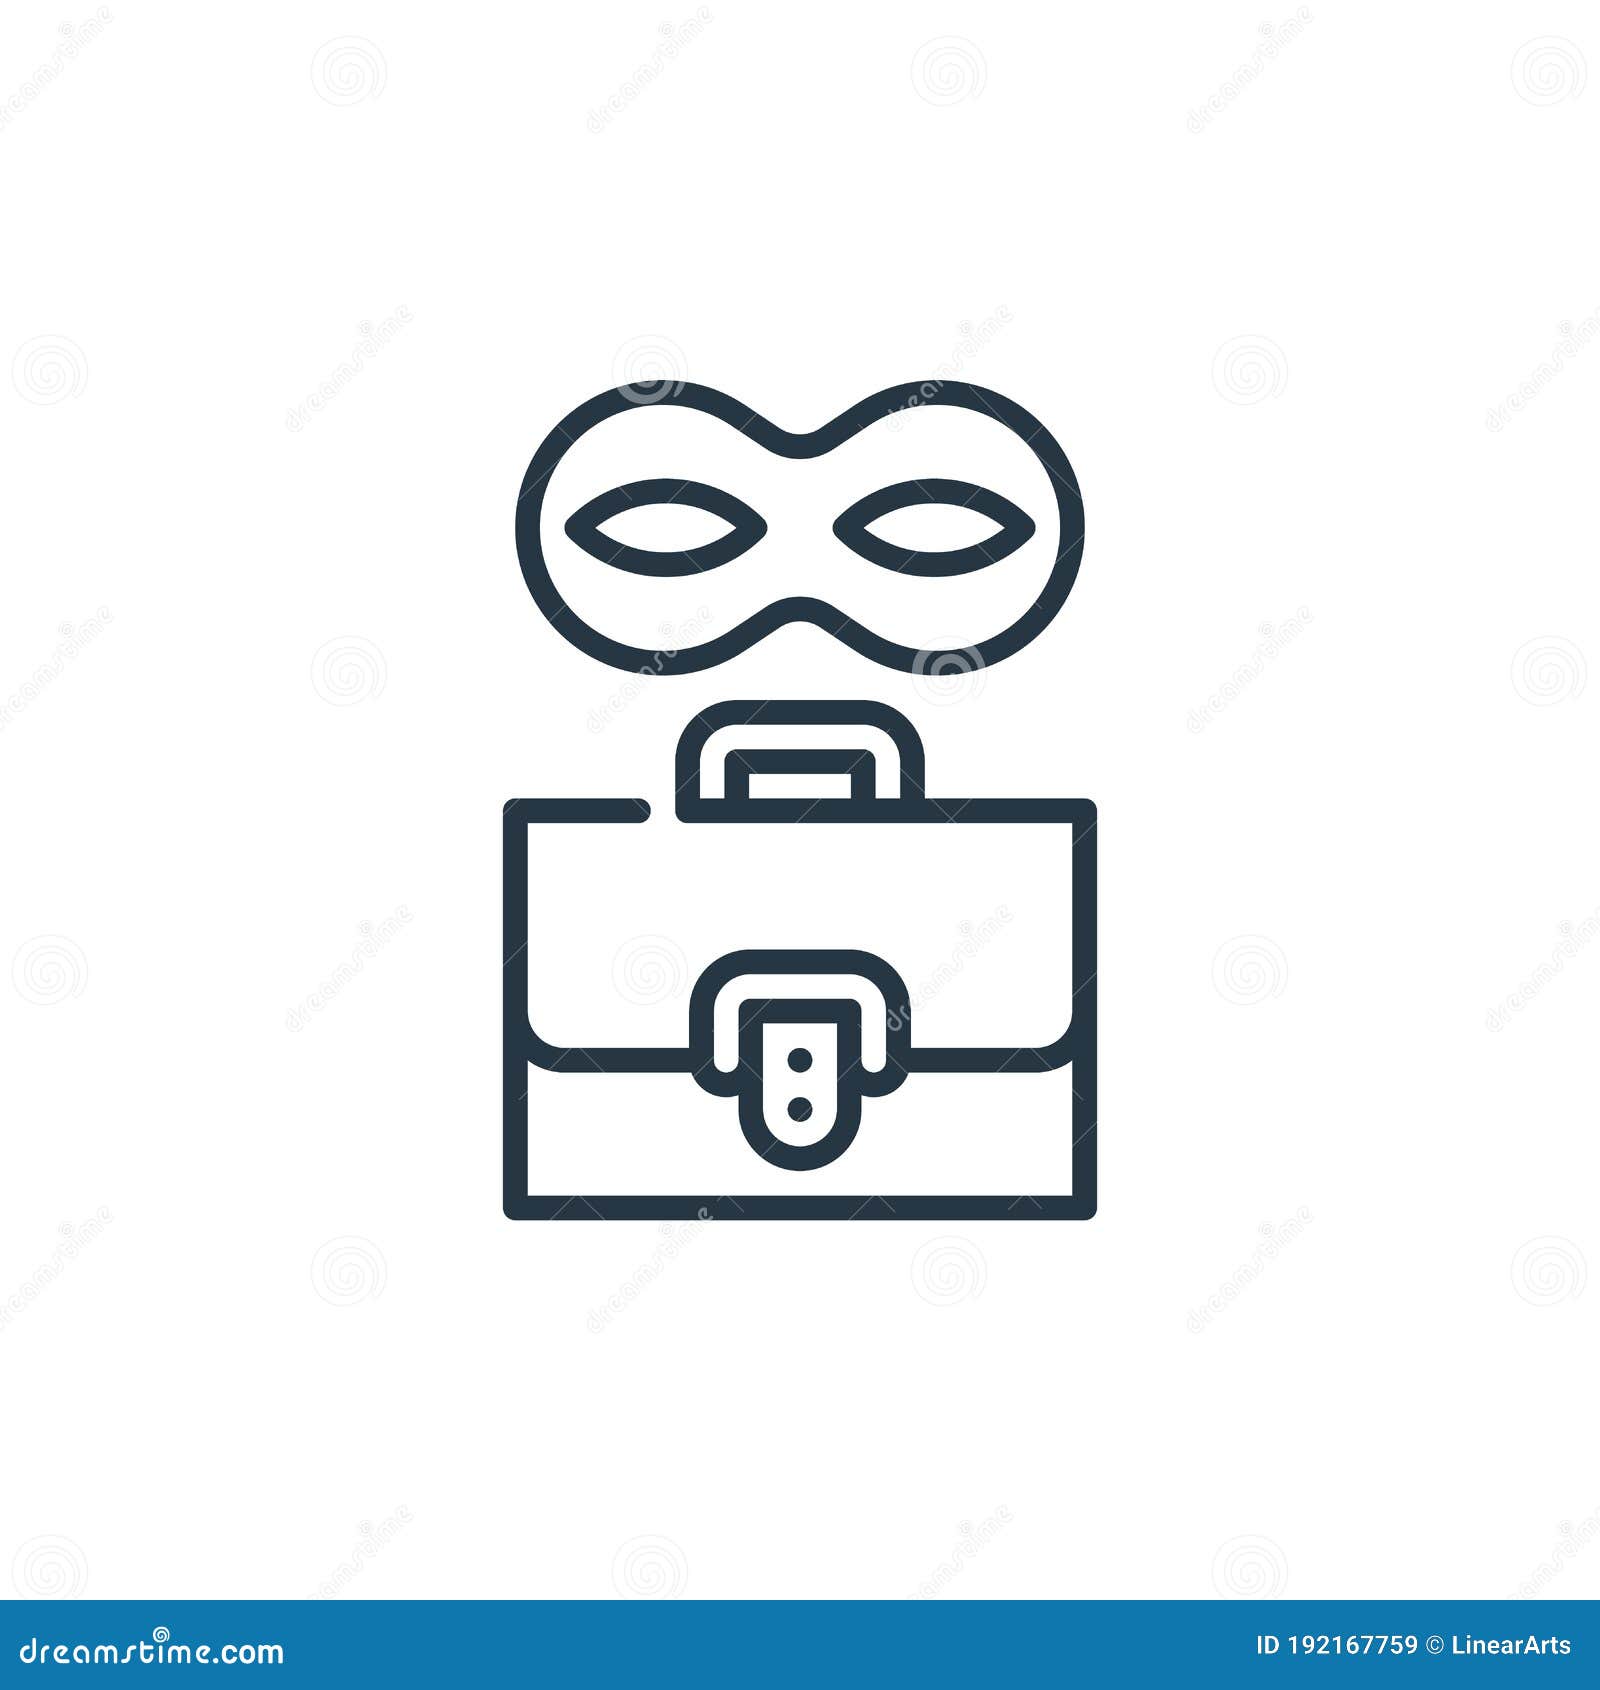 Fake Icon Vector from Cyber Security Concept. Thin Line Illustration of ...